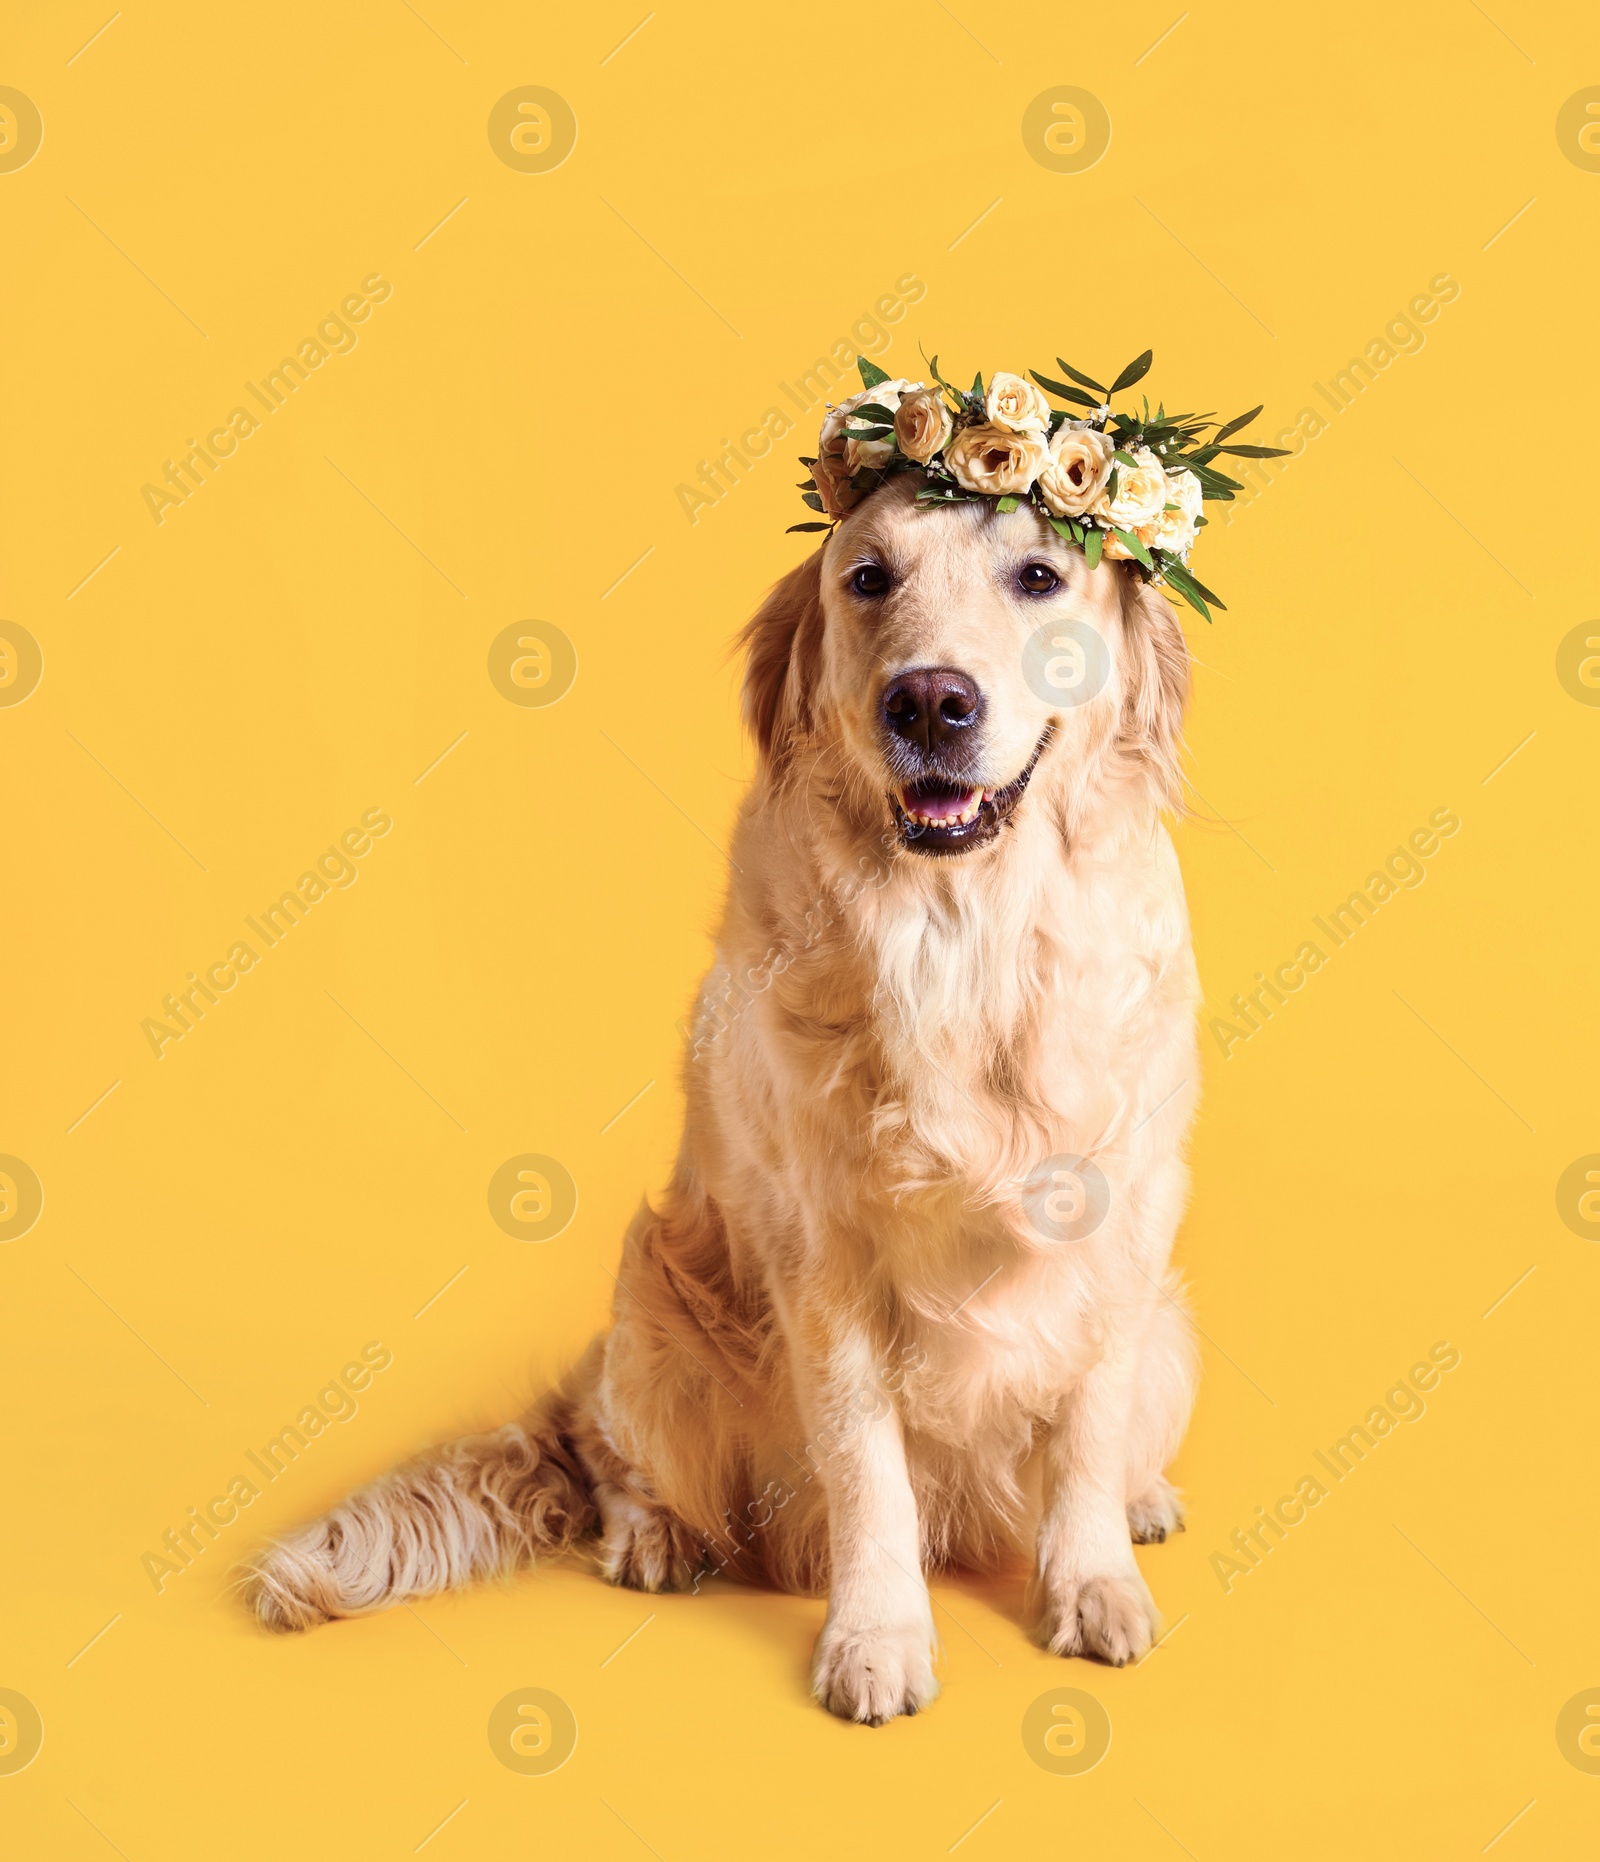 Photo of Adorable golden Retriever wearing wreath made of beautiful flowers on yellow background